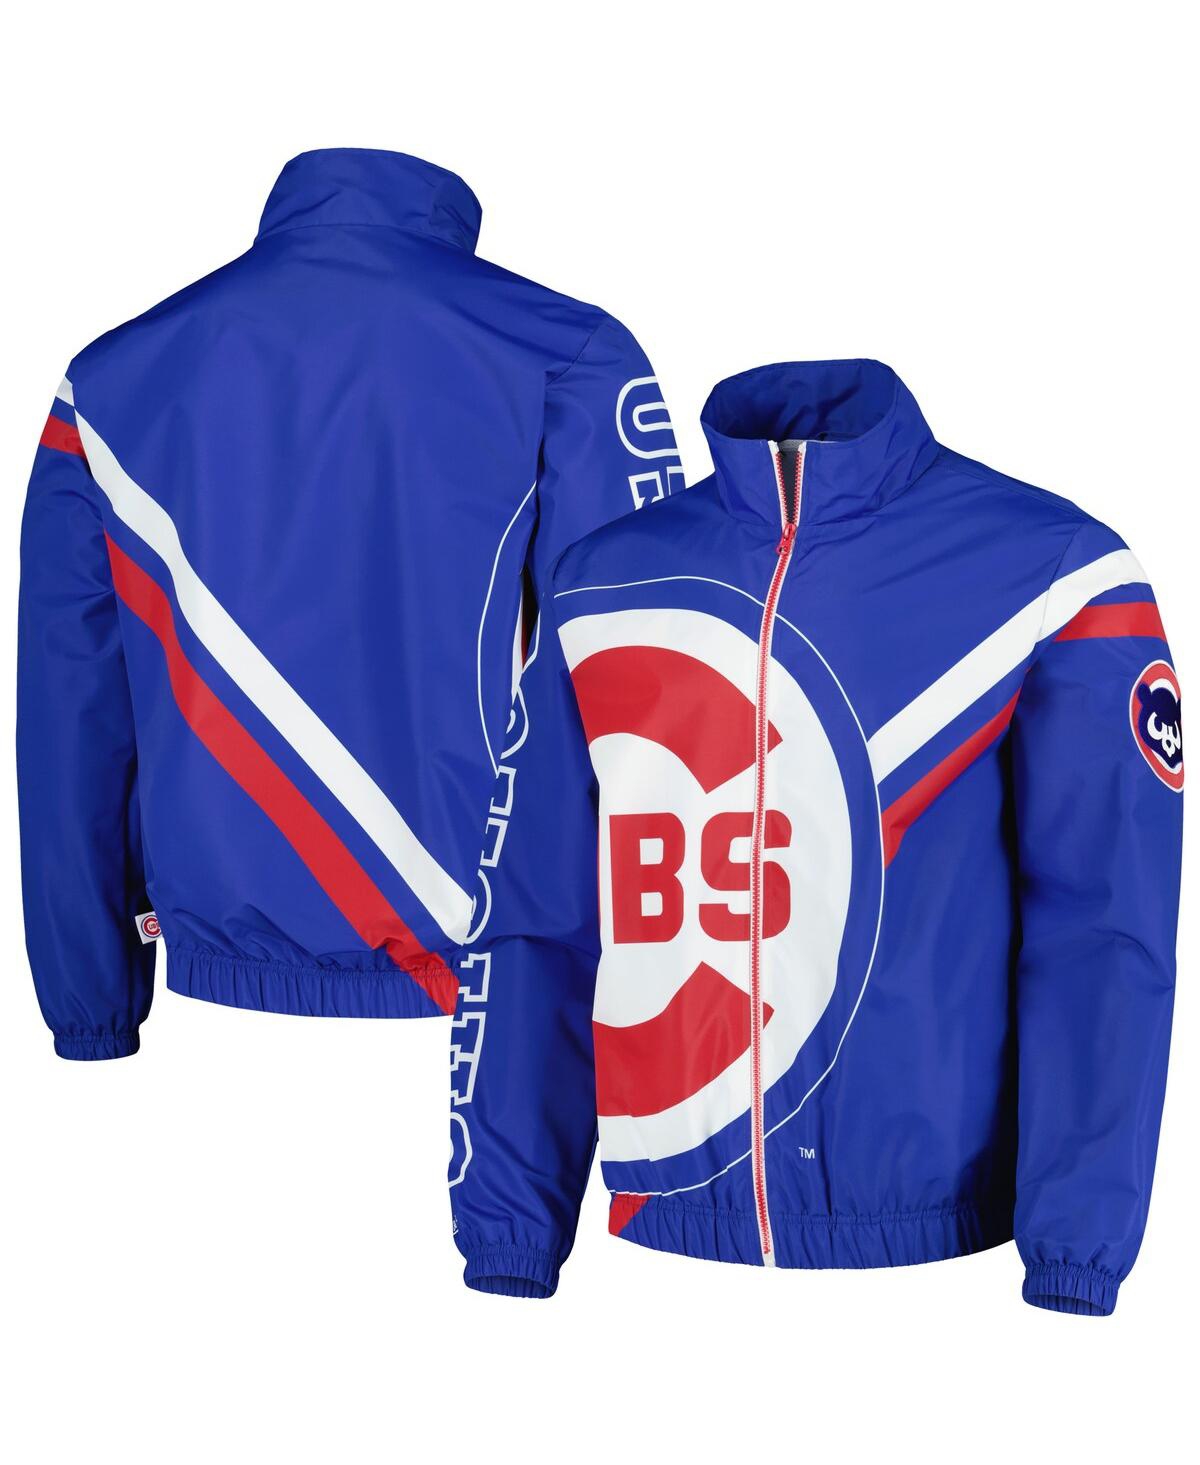 Shop Mitchell & Ness Men's  Royal Chicago Cubs Exploded Logo Warm Up Full-zip Jacket